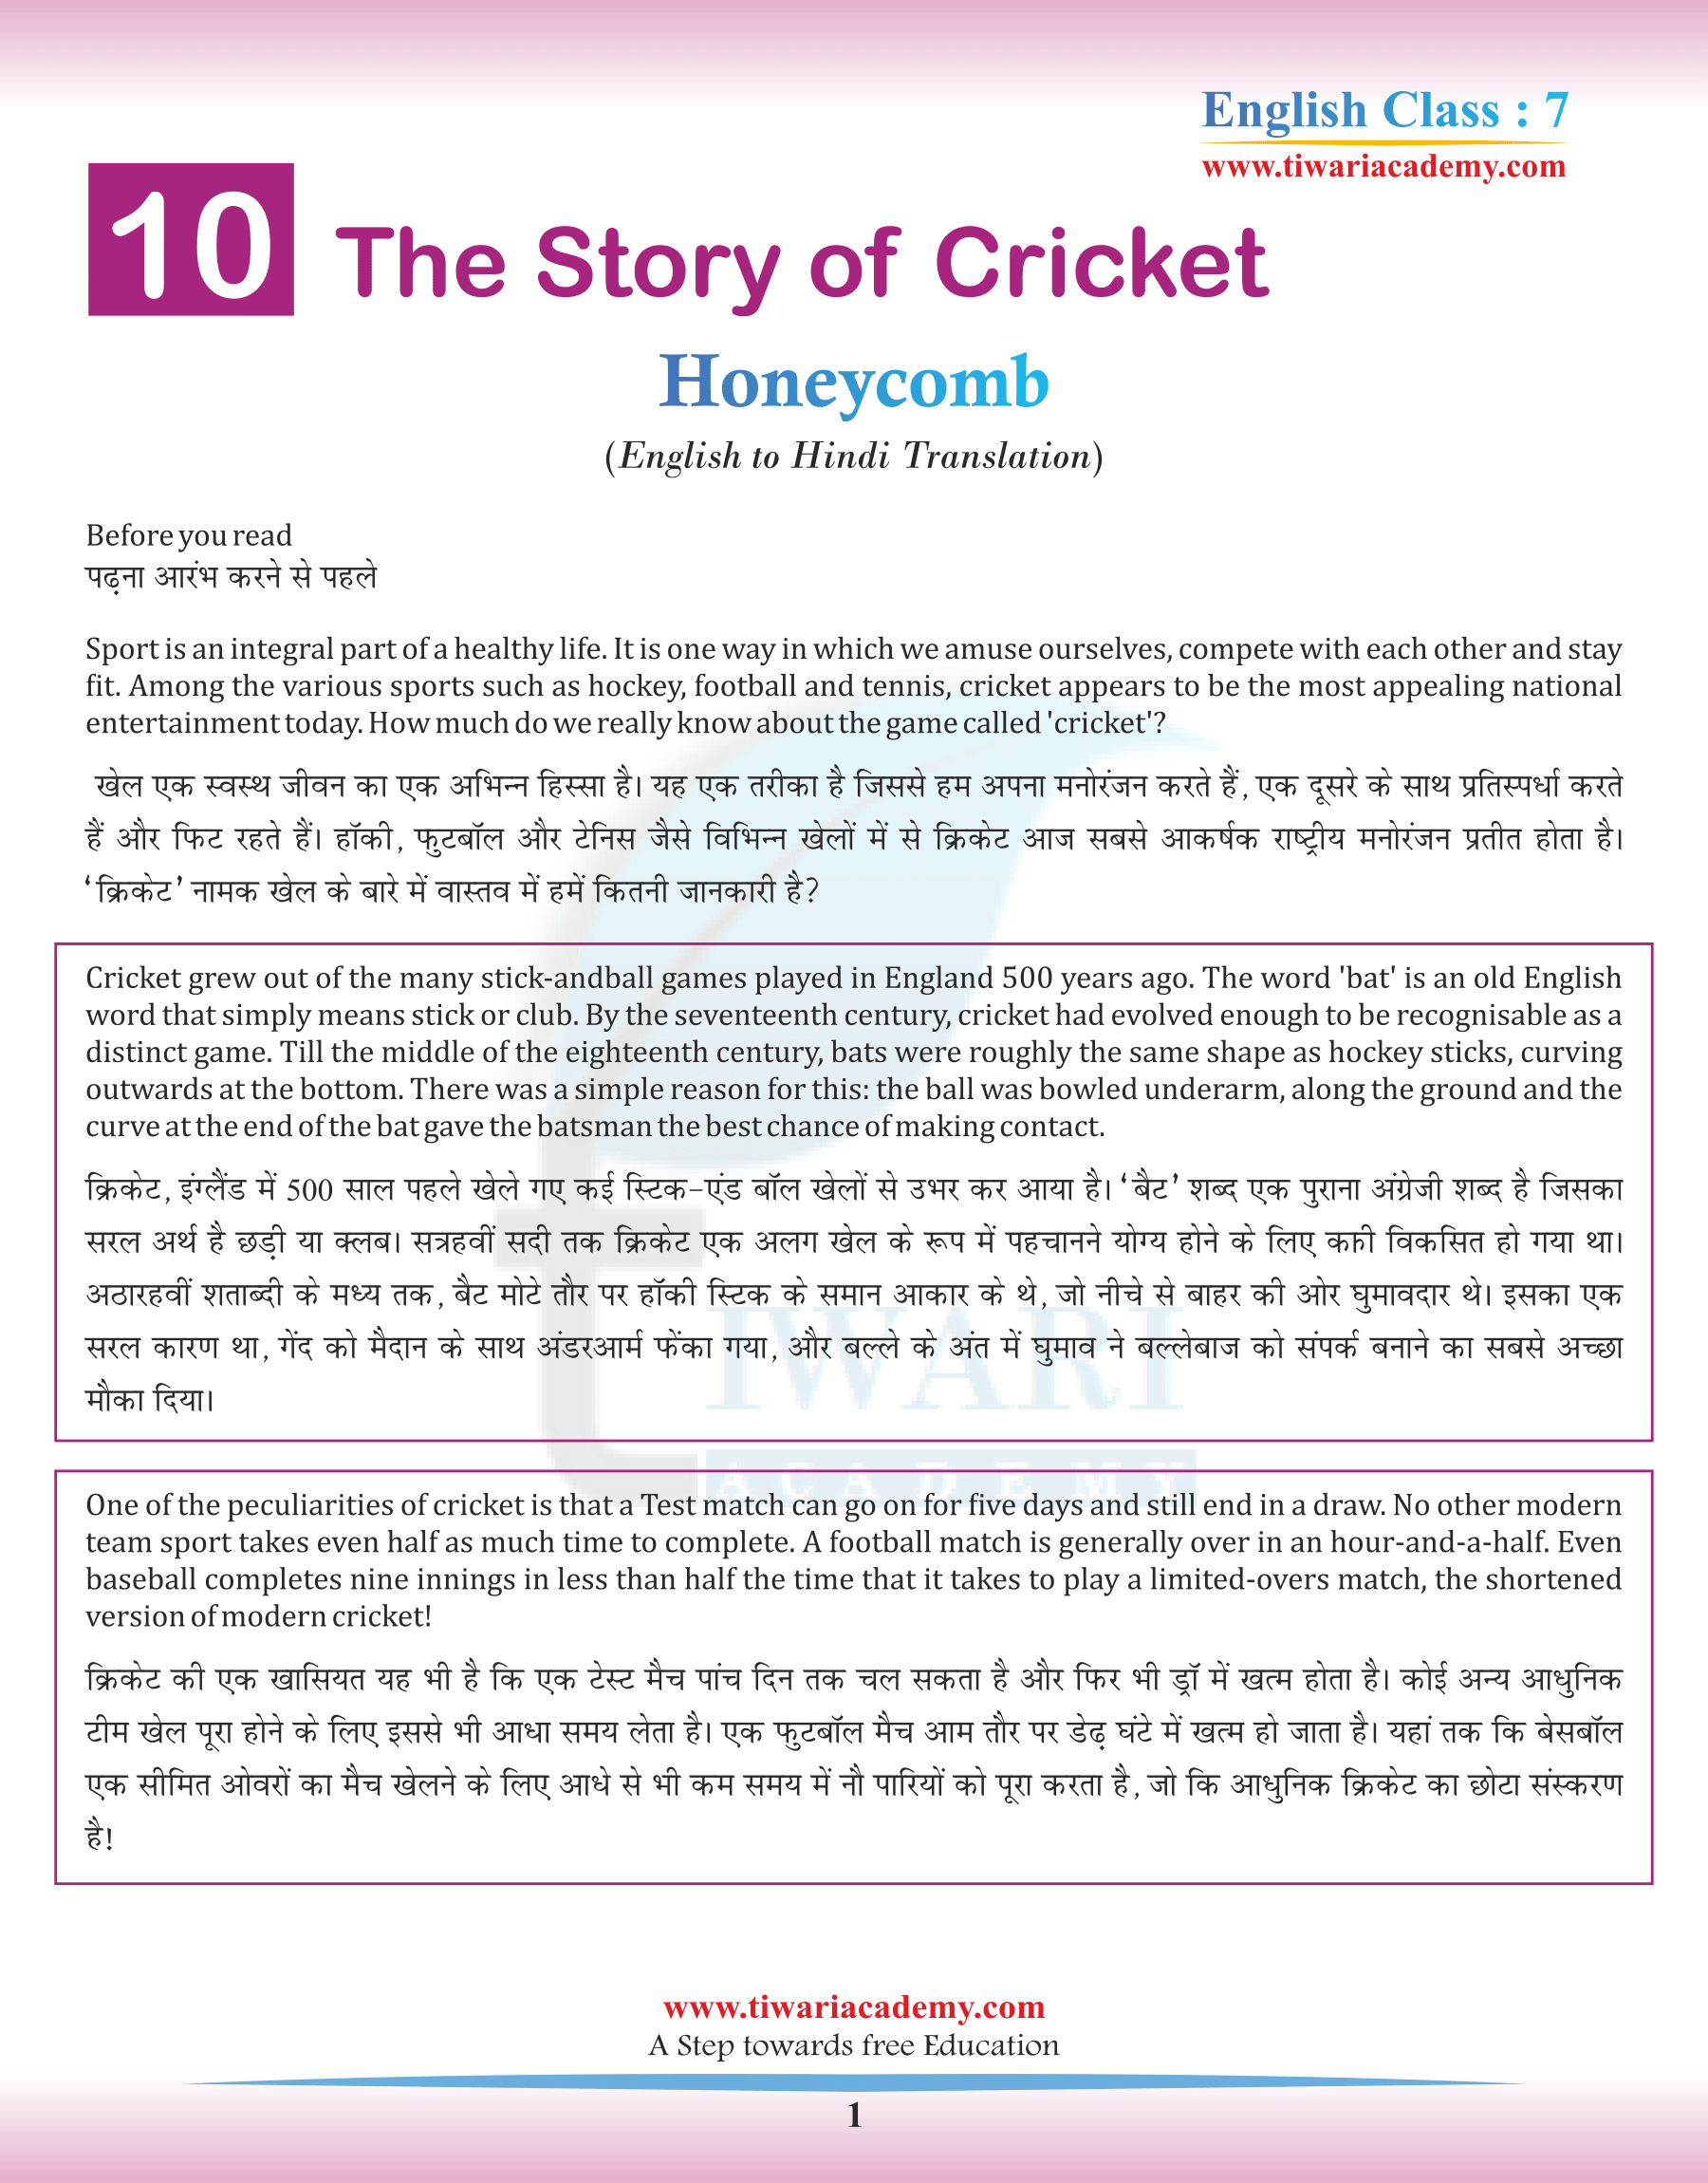 Class 7 English Honeycomb Chapter 10 The Story of Cricket in Hindi Medium